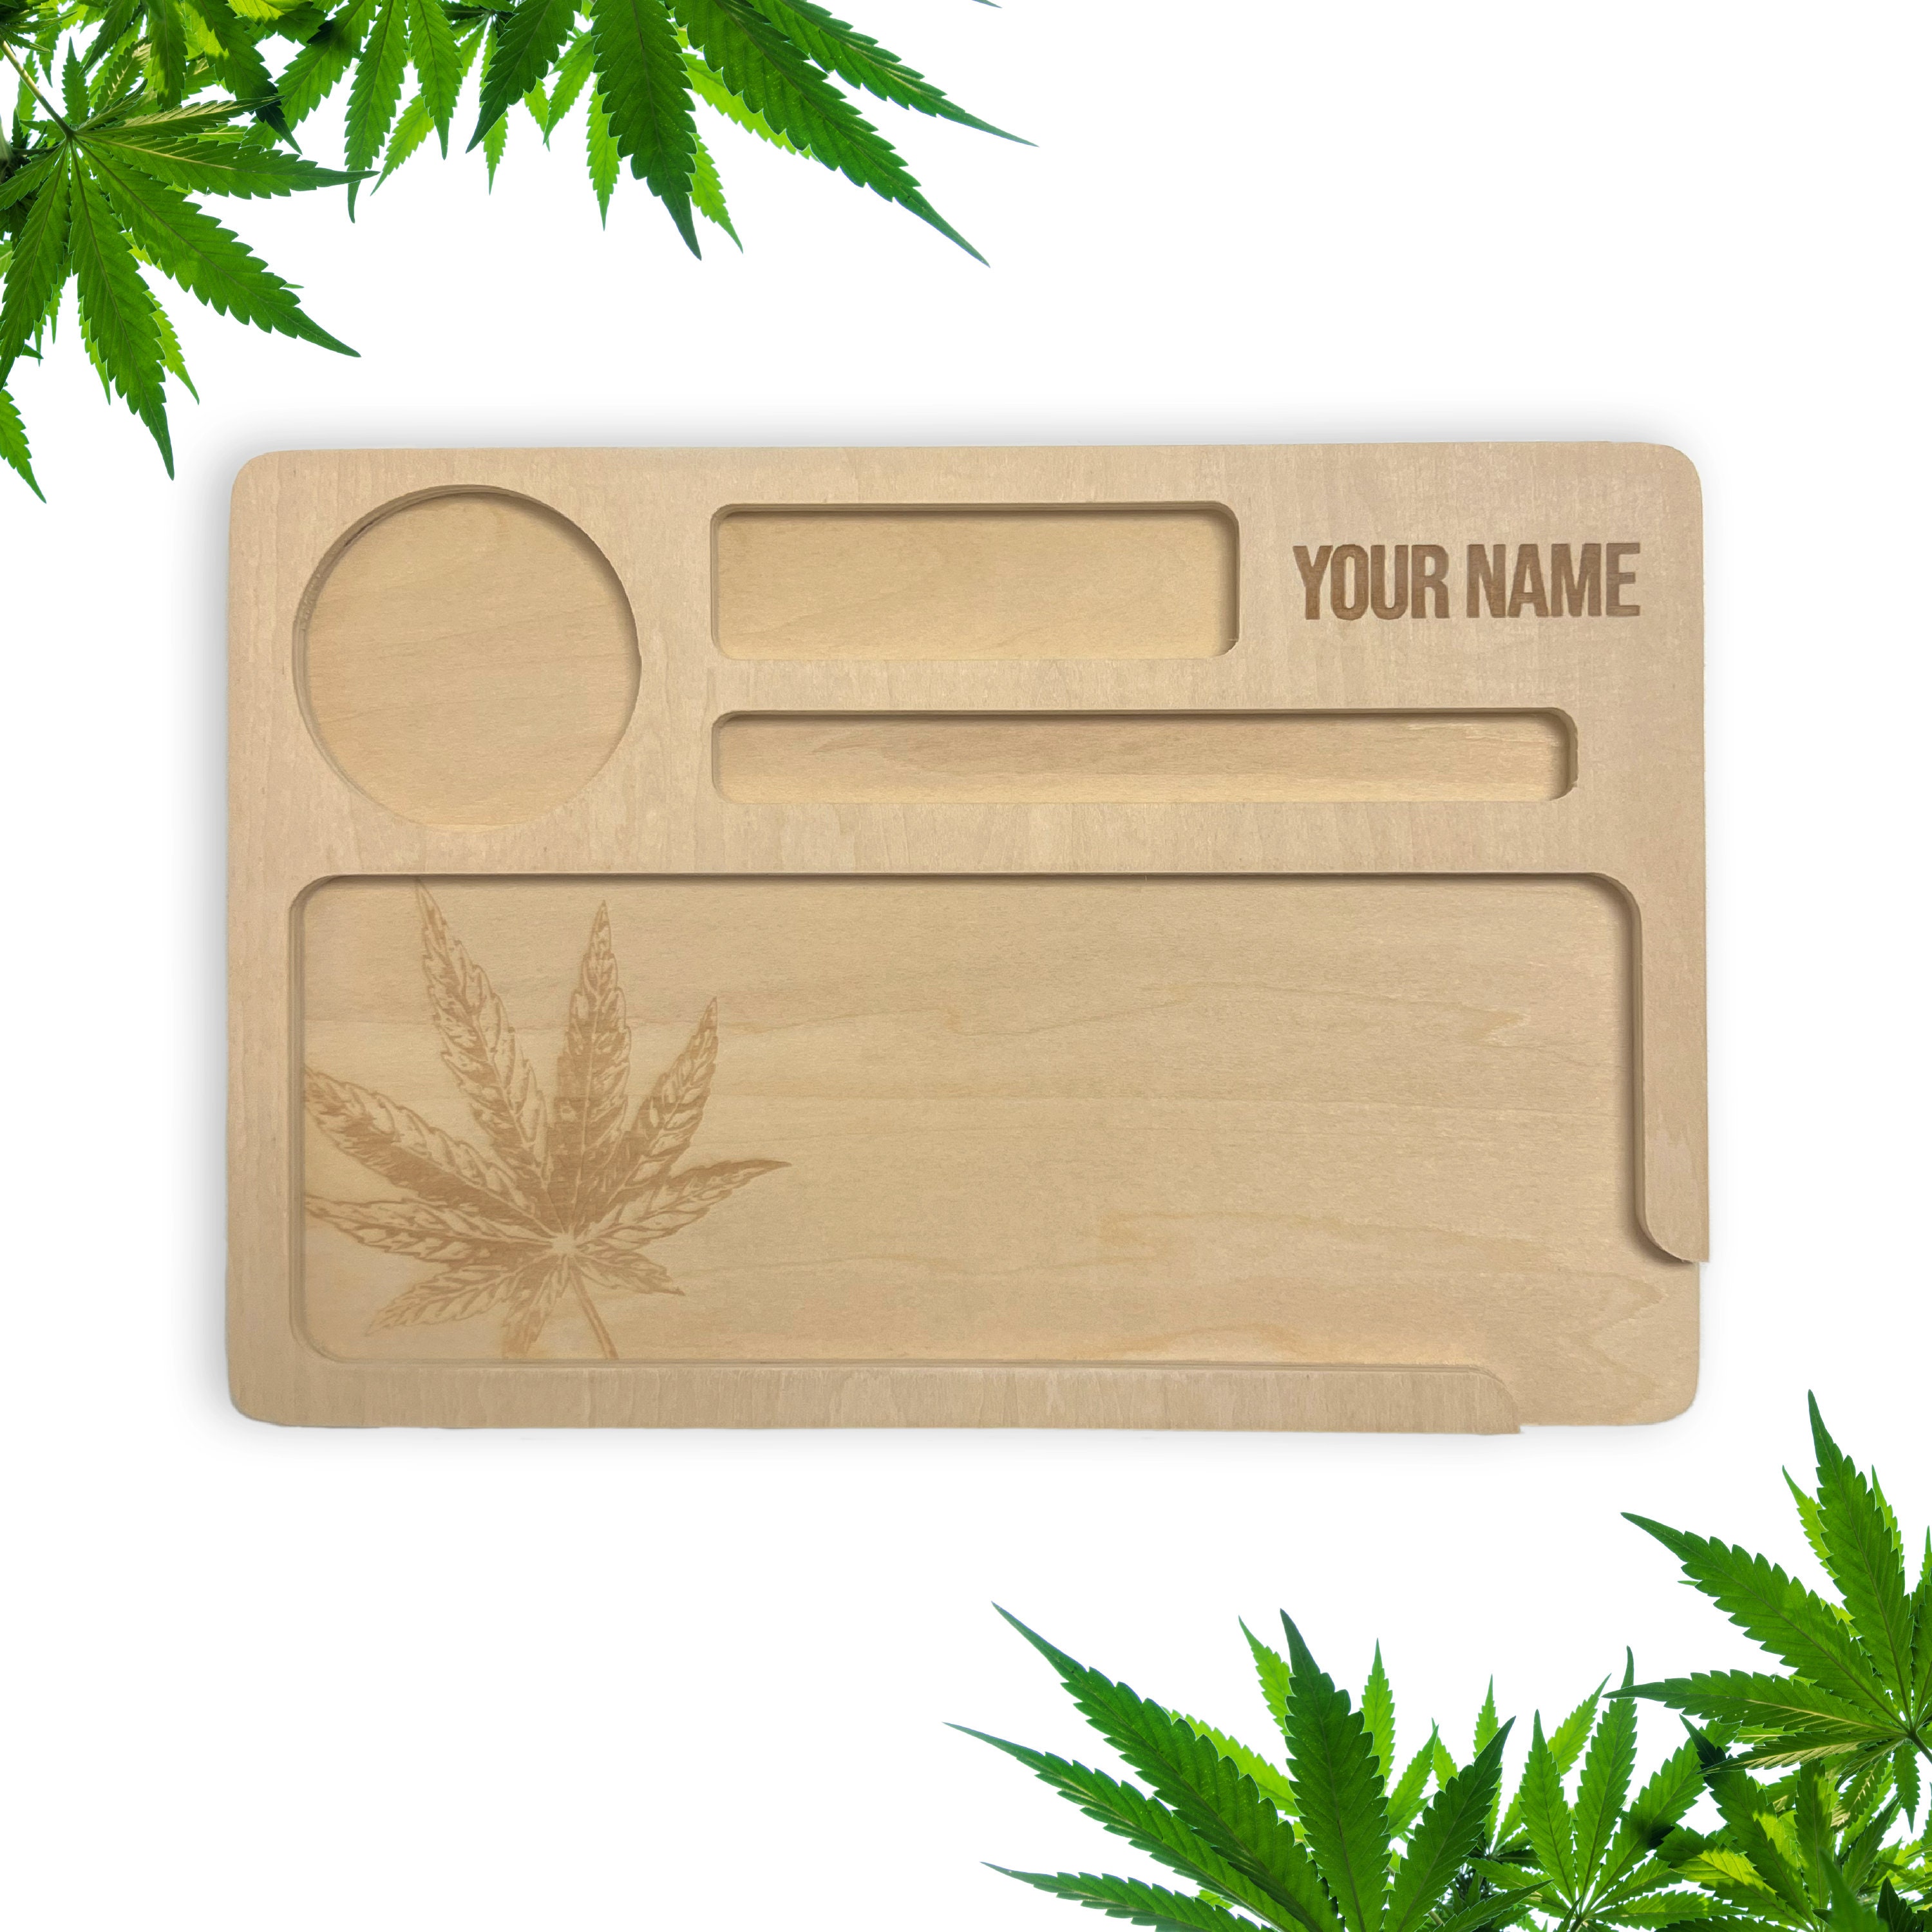 Branded Wooden Rolling Trays & Custom Cannabis Promo Items